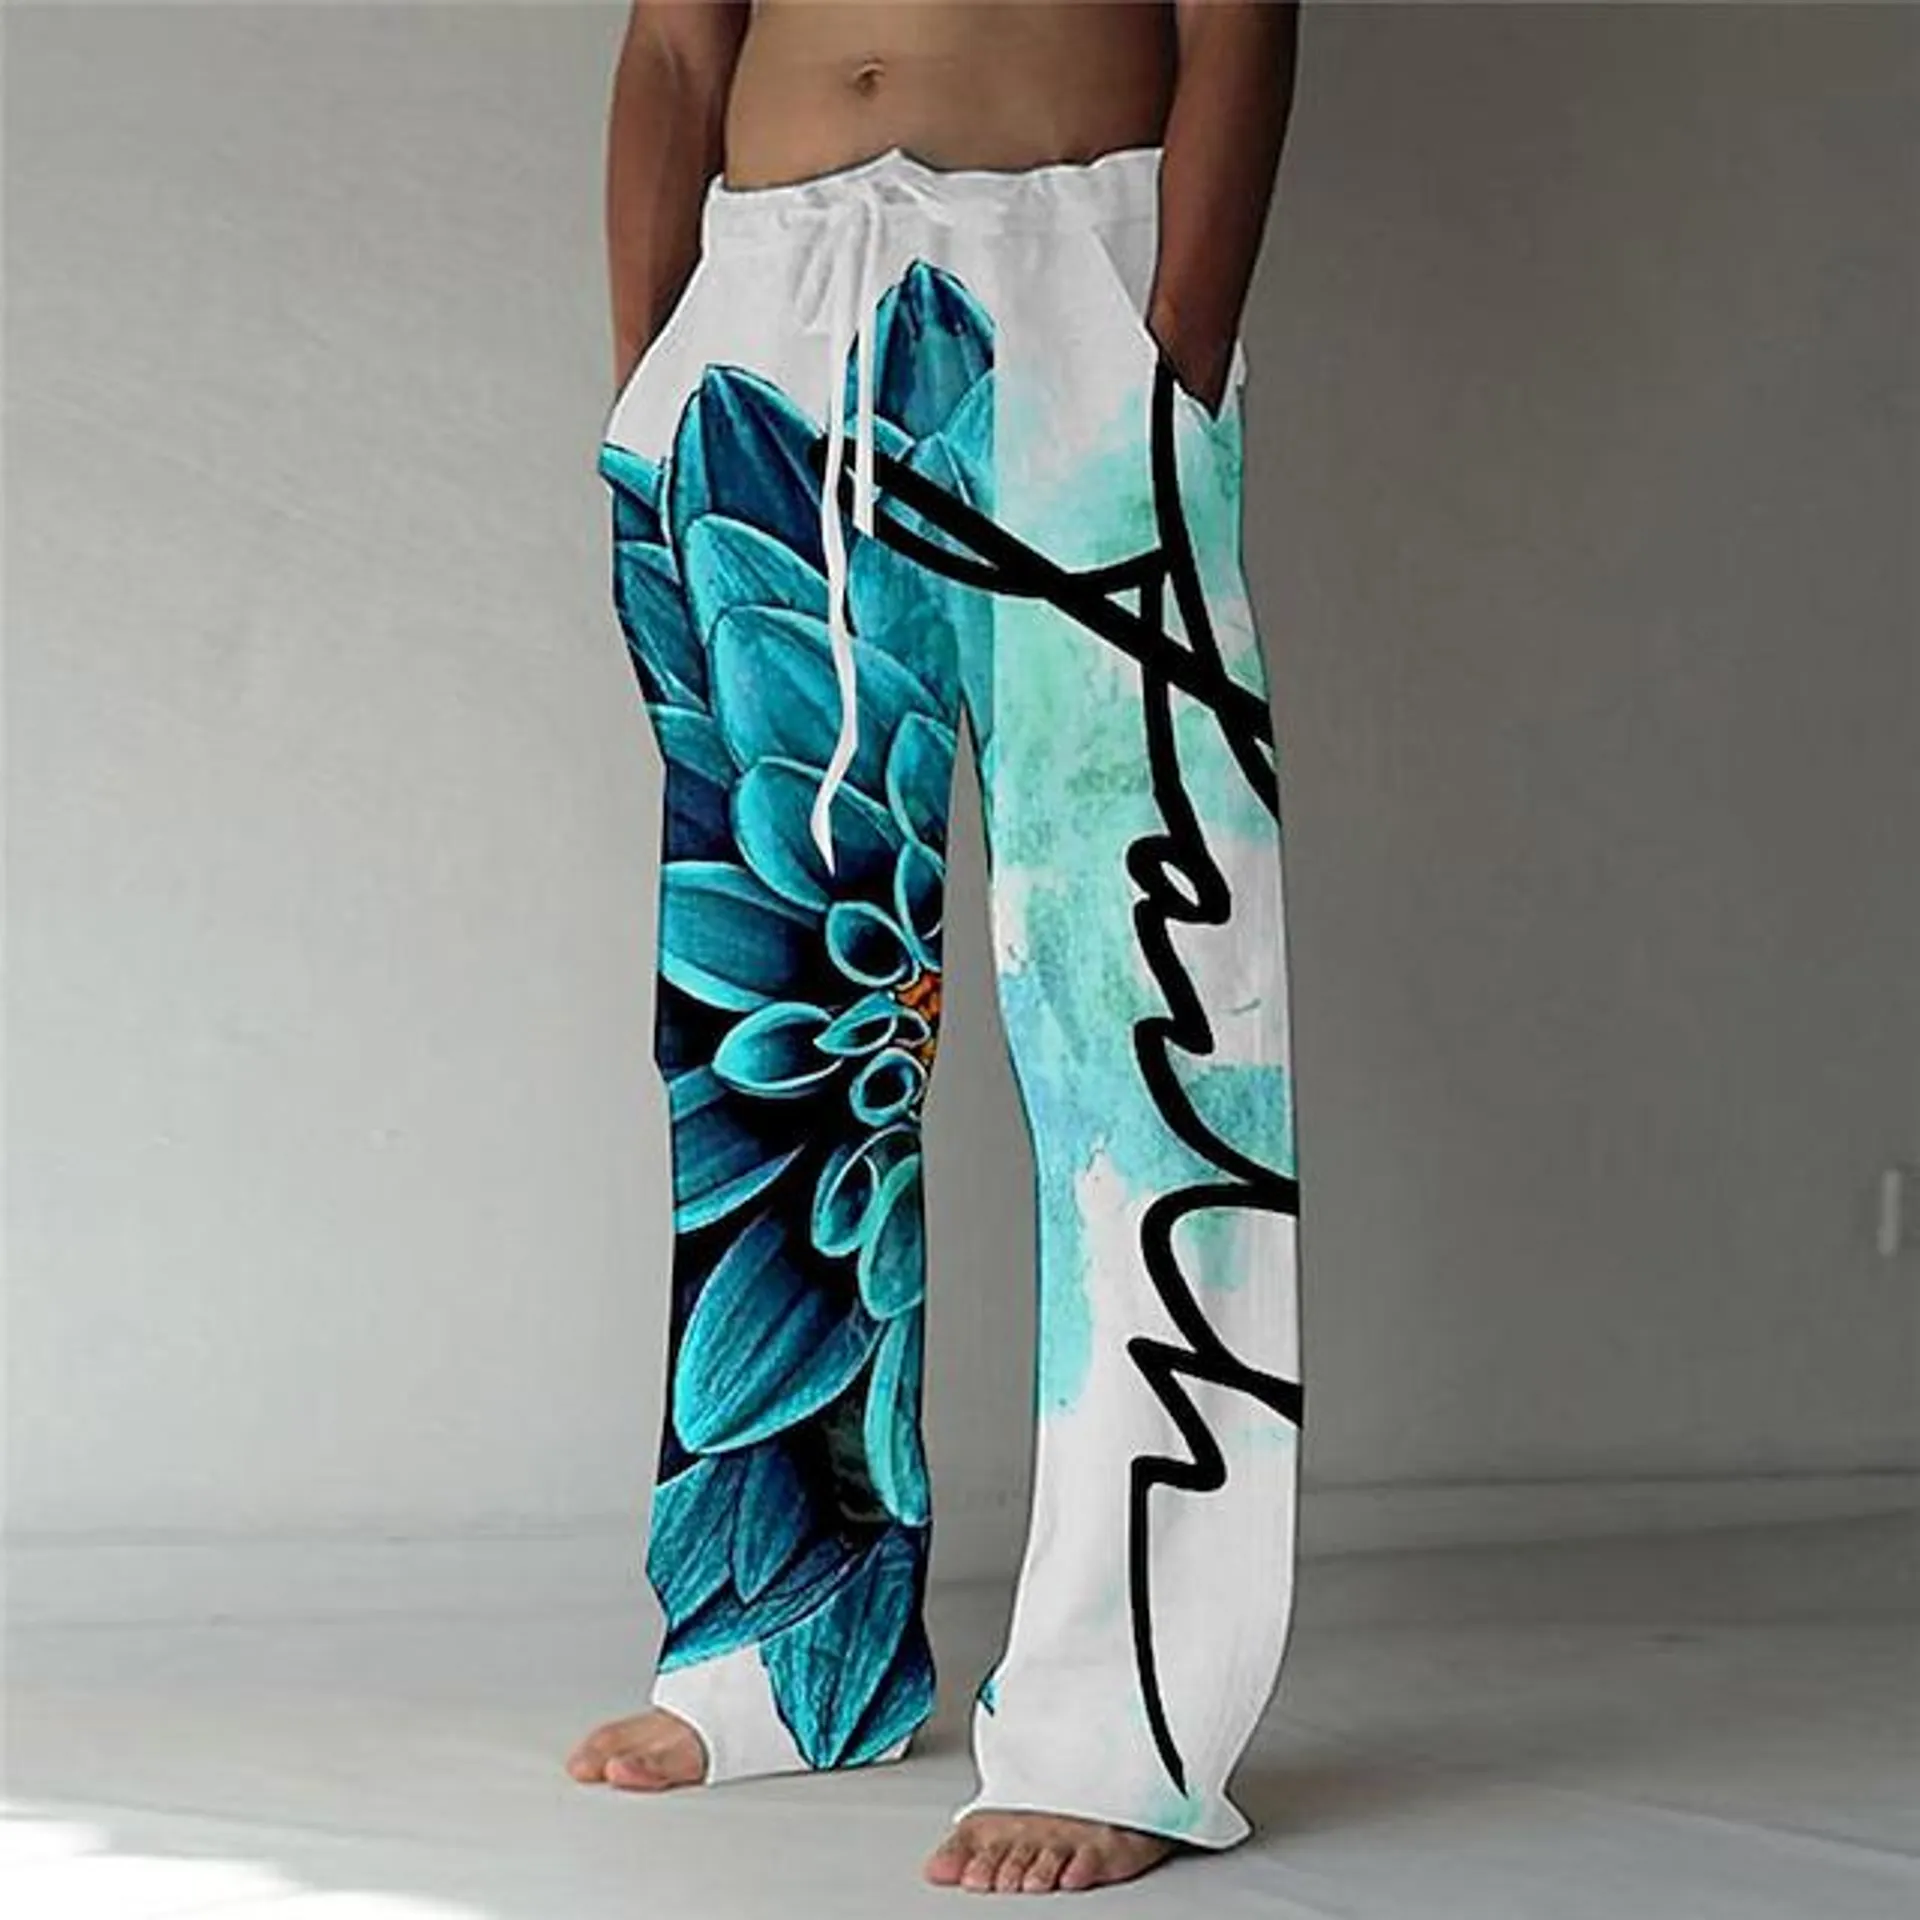 Men's Trousers Summer Pants Beach Pants Elastic Drawstring Design Front Pocket Straight Leg Graphic Prints Flower / Floral Comfort Soft Casual Daily For Vacation Fashion Designer Navy Blue Blue